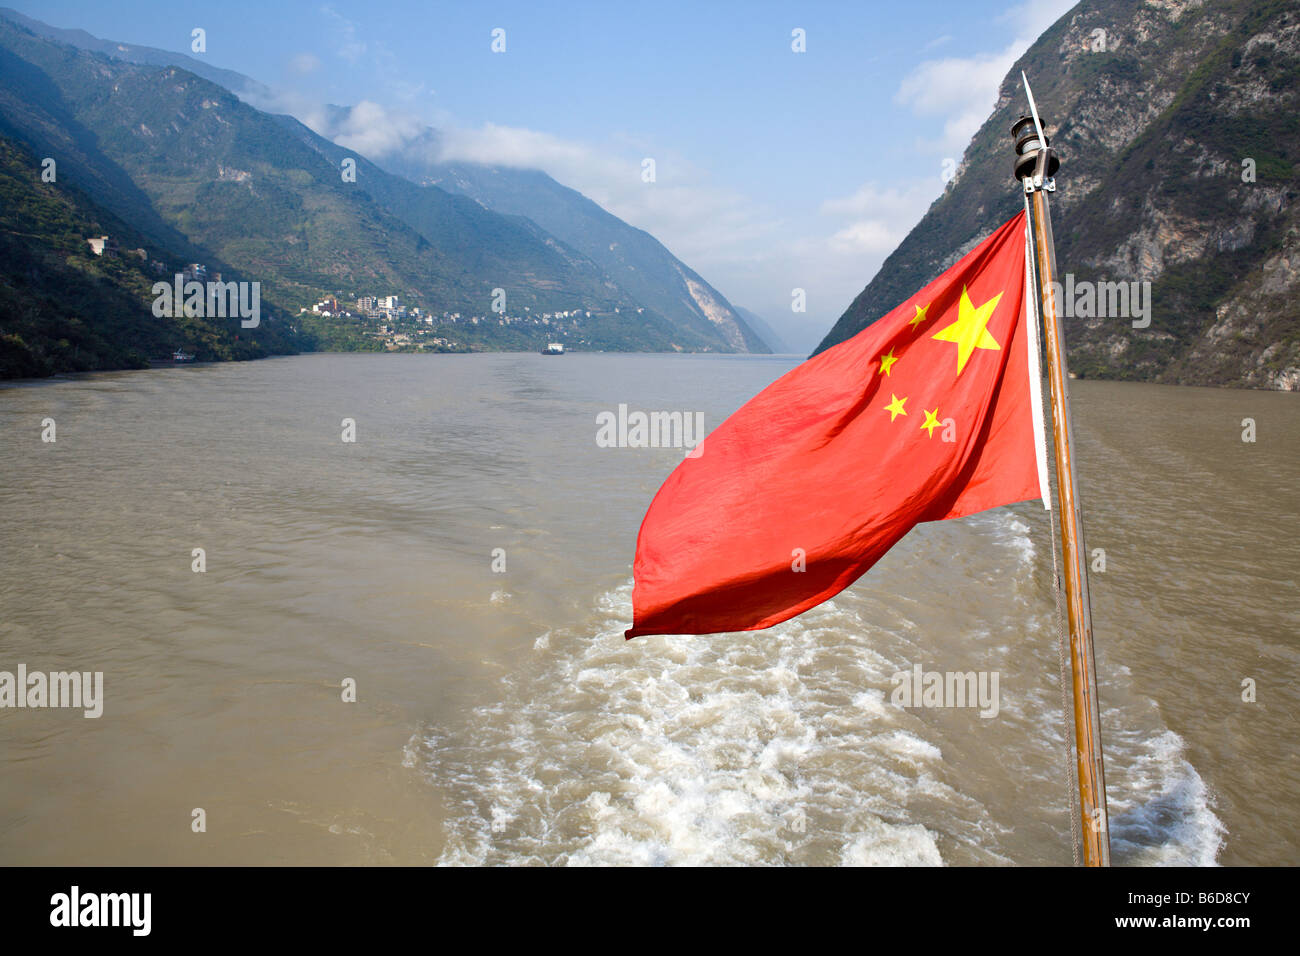 CHINA, YANGTZE RIVER GORGE: Bright red five starred flag of the Peoples Republic of China flies from a Yangtze River cruise ship Stock Photo